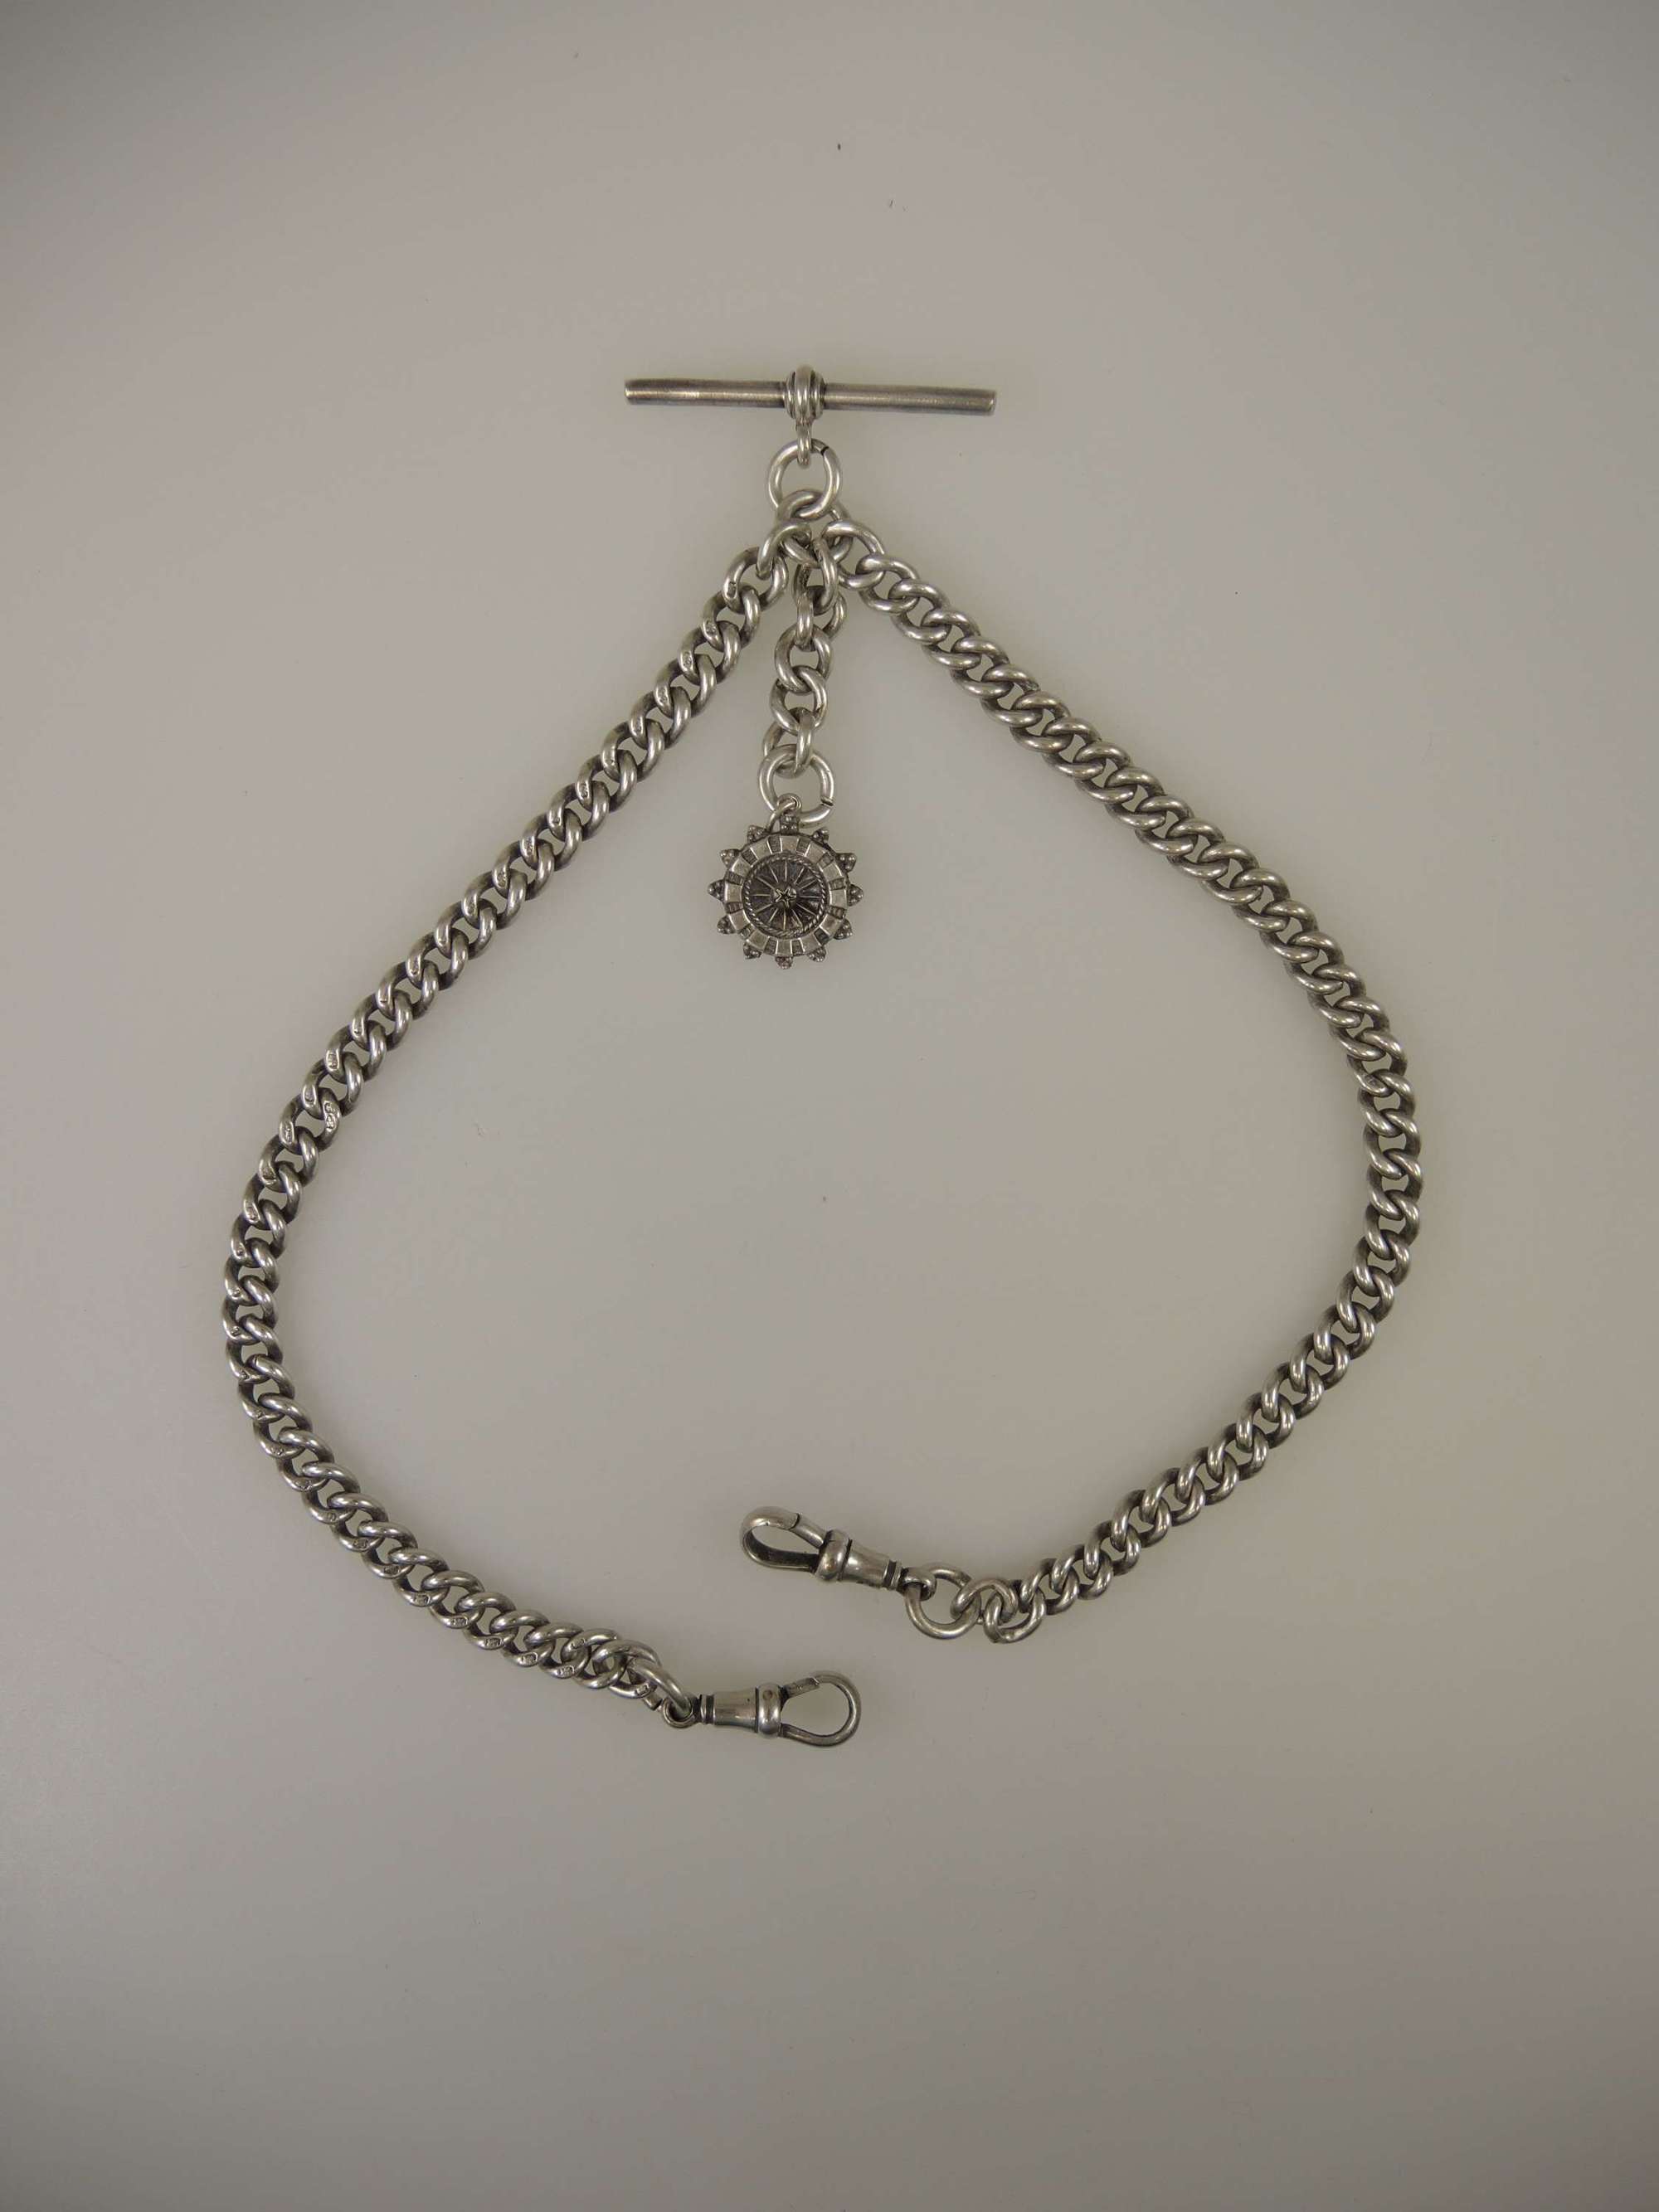 Top quality English silver double watch chain. Chester 1911